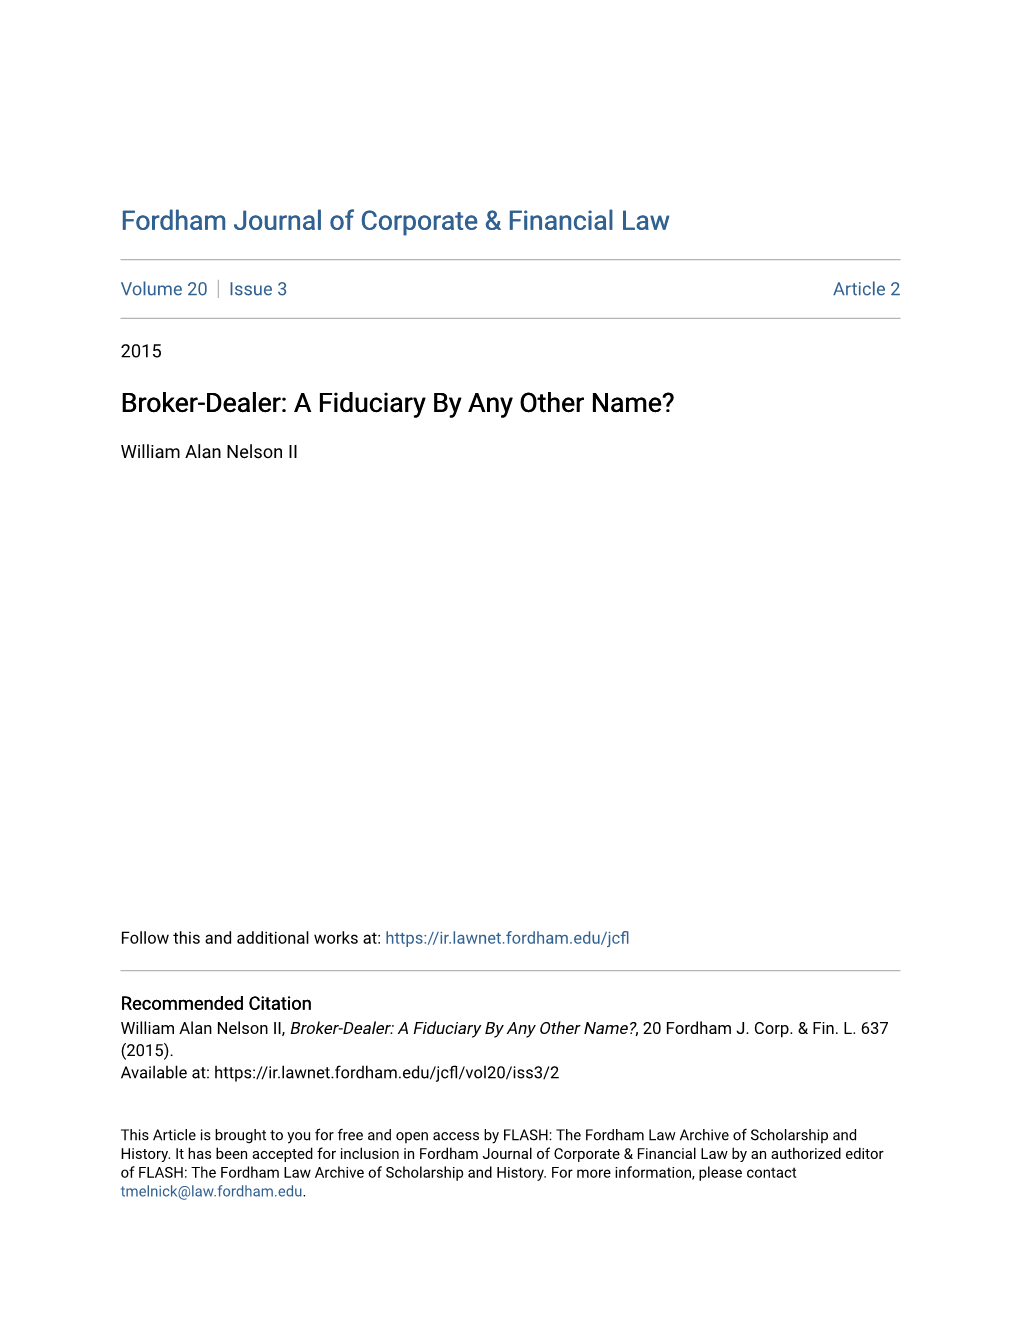 Broker-Dealer: a Fiduciary by Any Other Name?